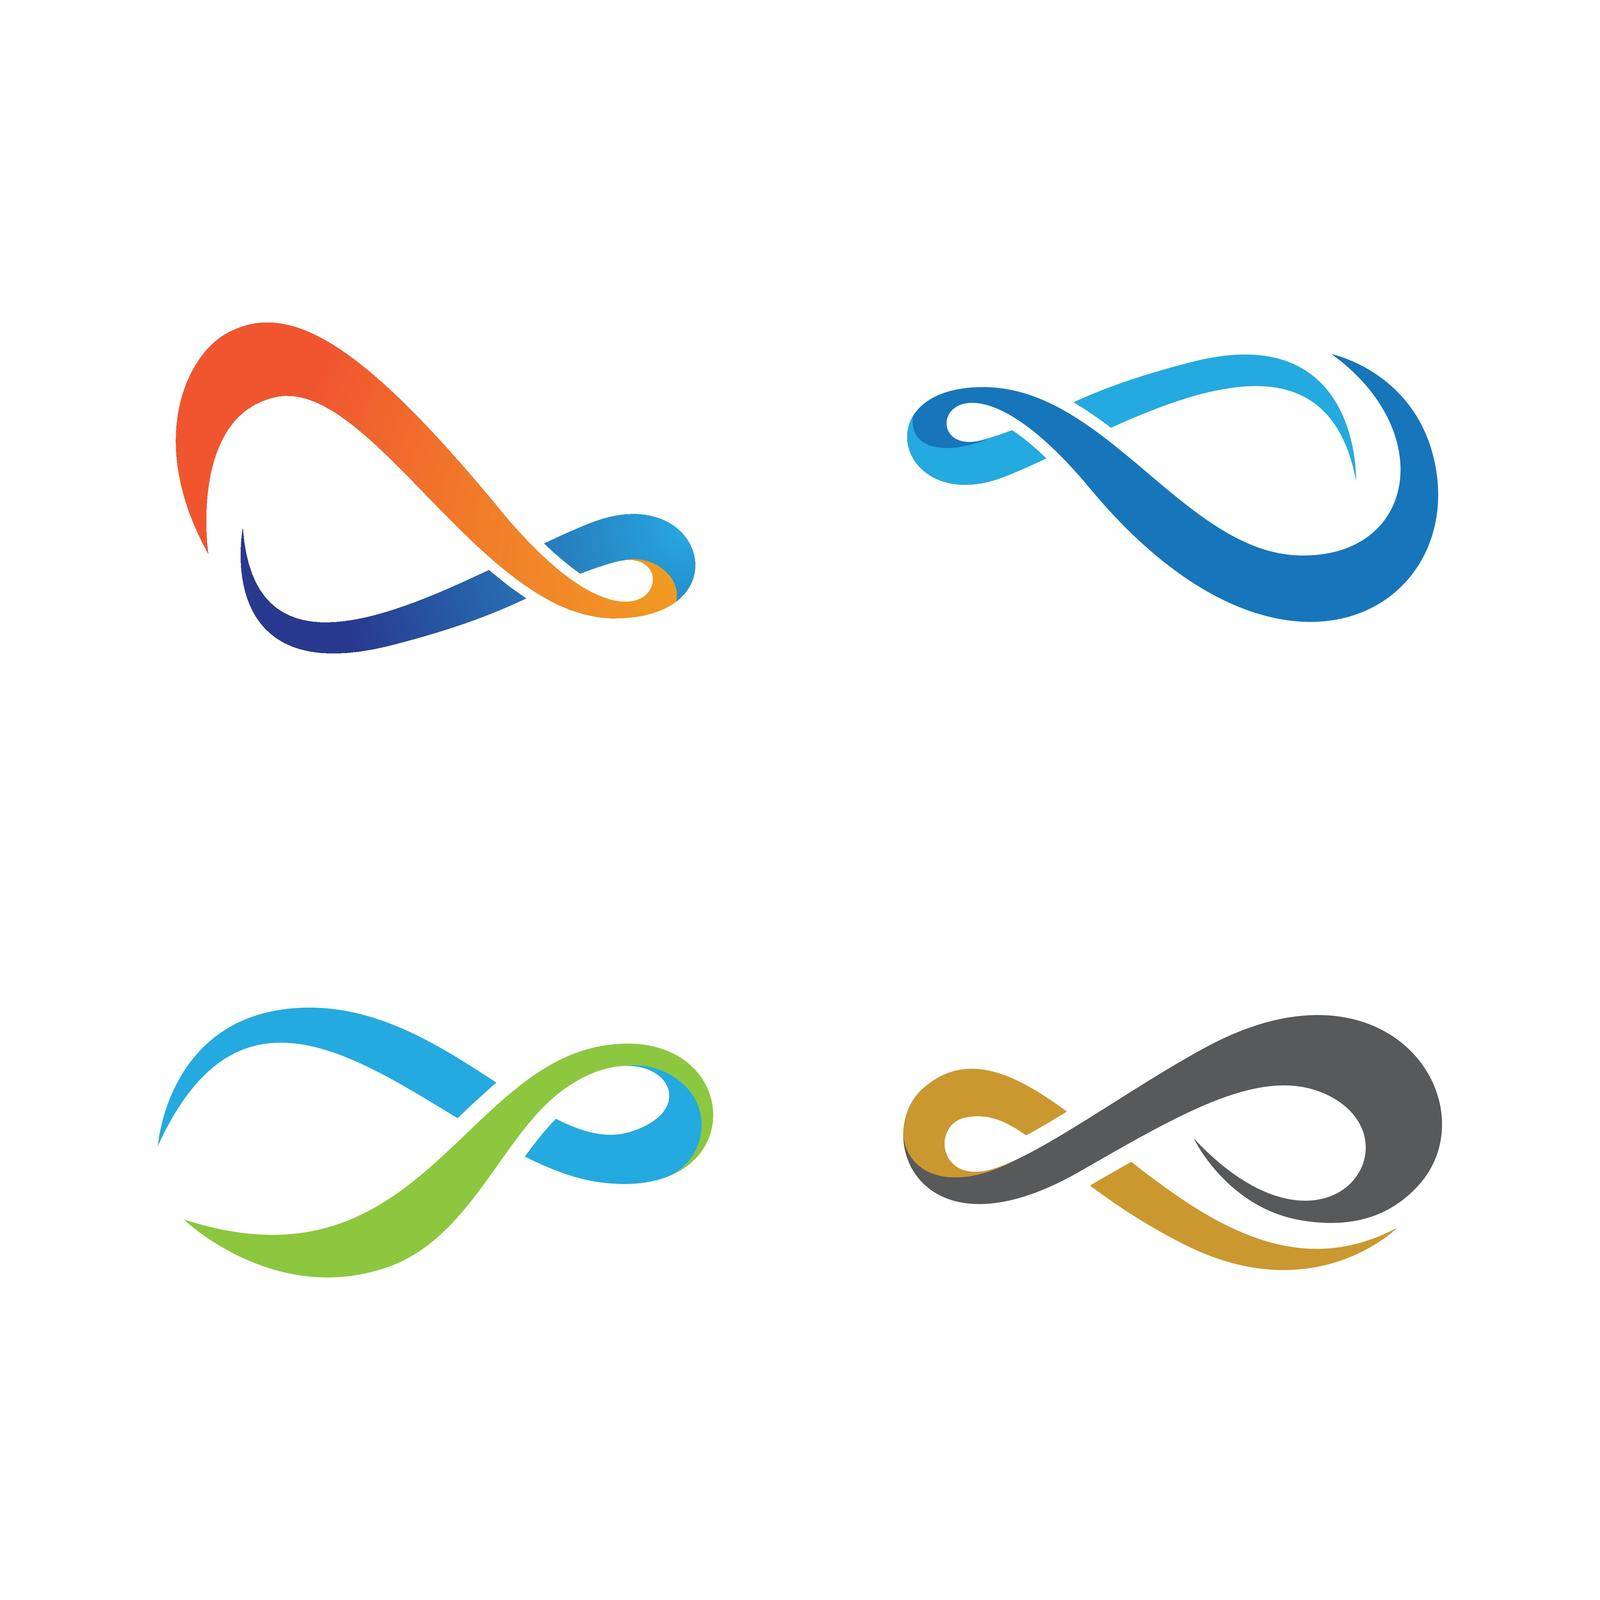 Infinity logo images by Fat17